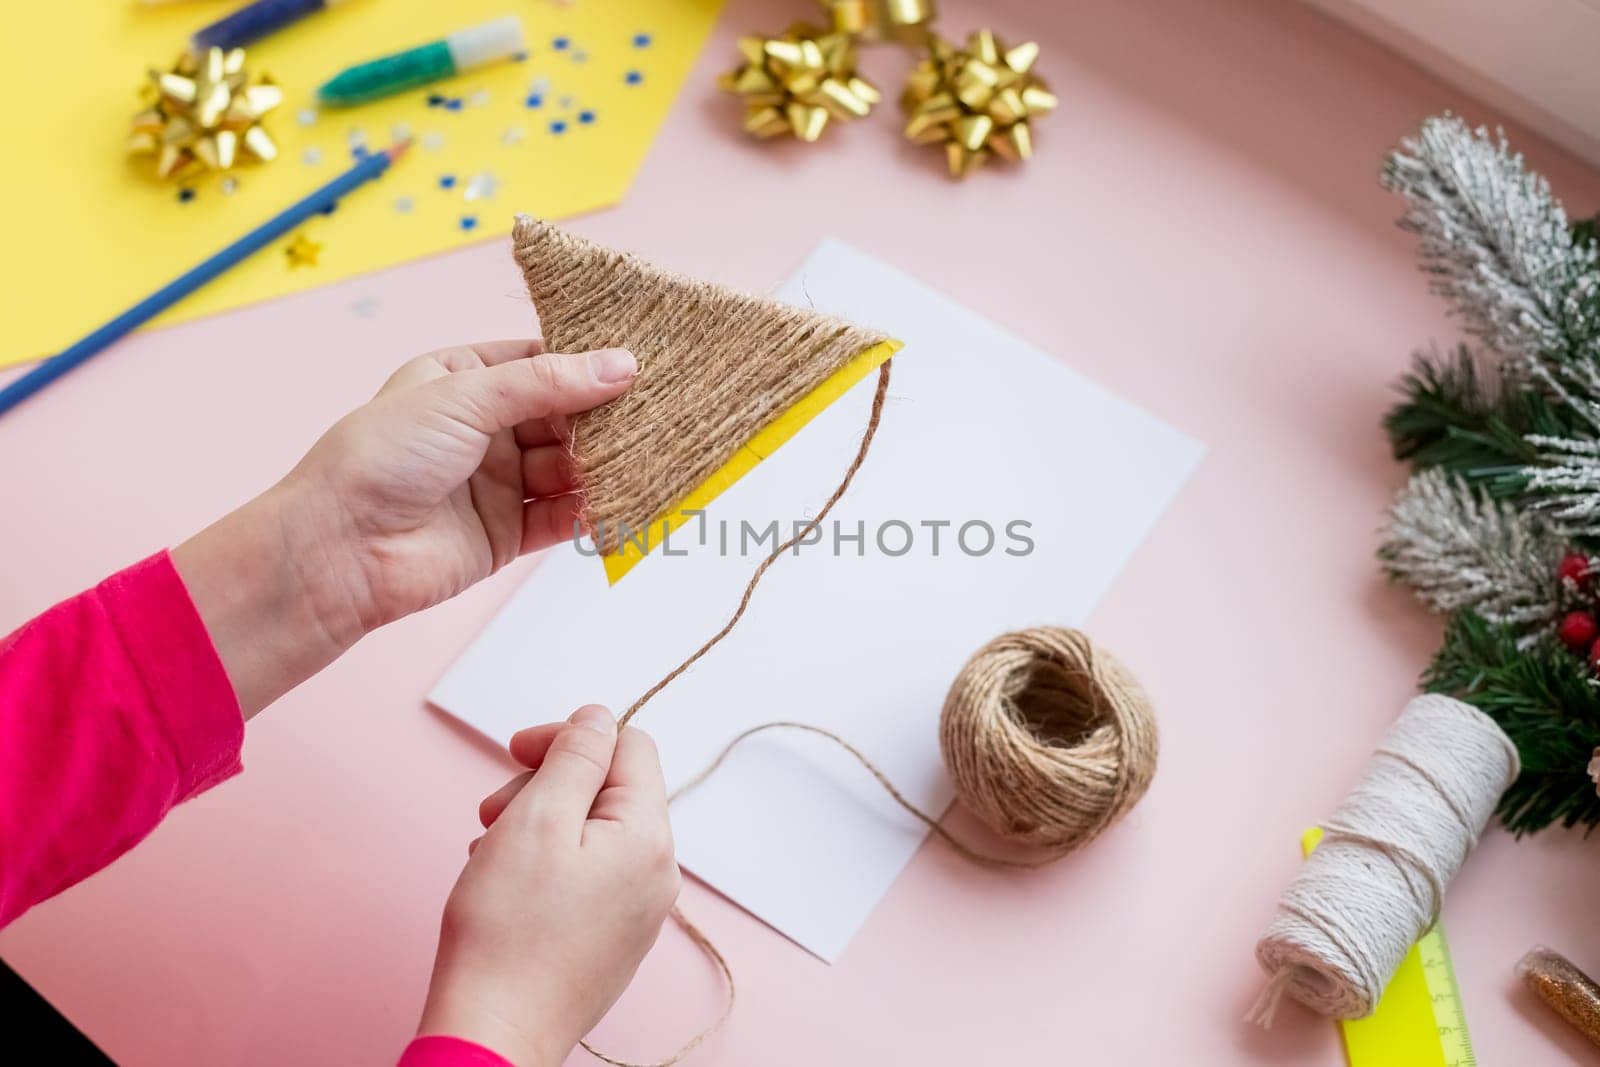 the child makes a New Year card for the winter holidays. DIY crafts and crafts for Christmas do-it-yourself concept